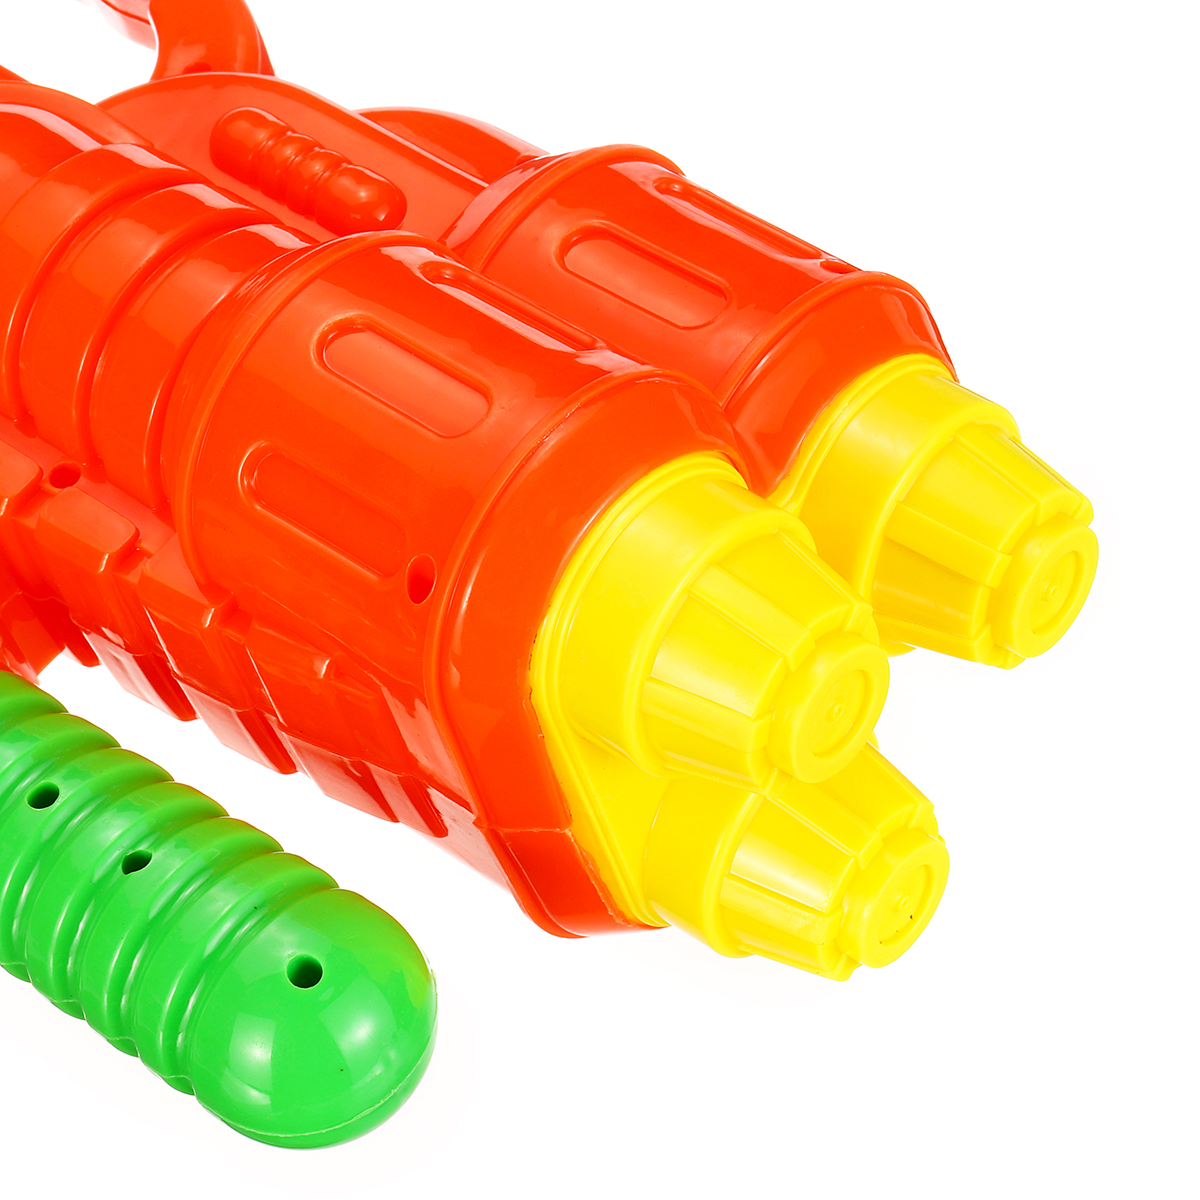 1500ml-Red-Or-Blue-Toy-Water-Sprinkler-With-A-Range-Of-7-9m-Plastic-Water-Sprinkler-For-Children-Bea-1703042-11